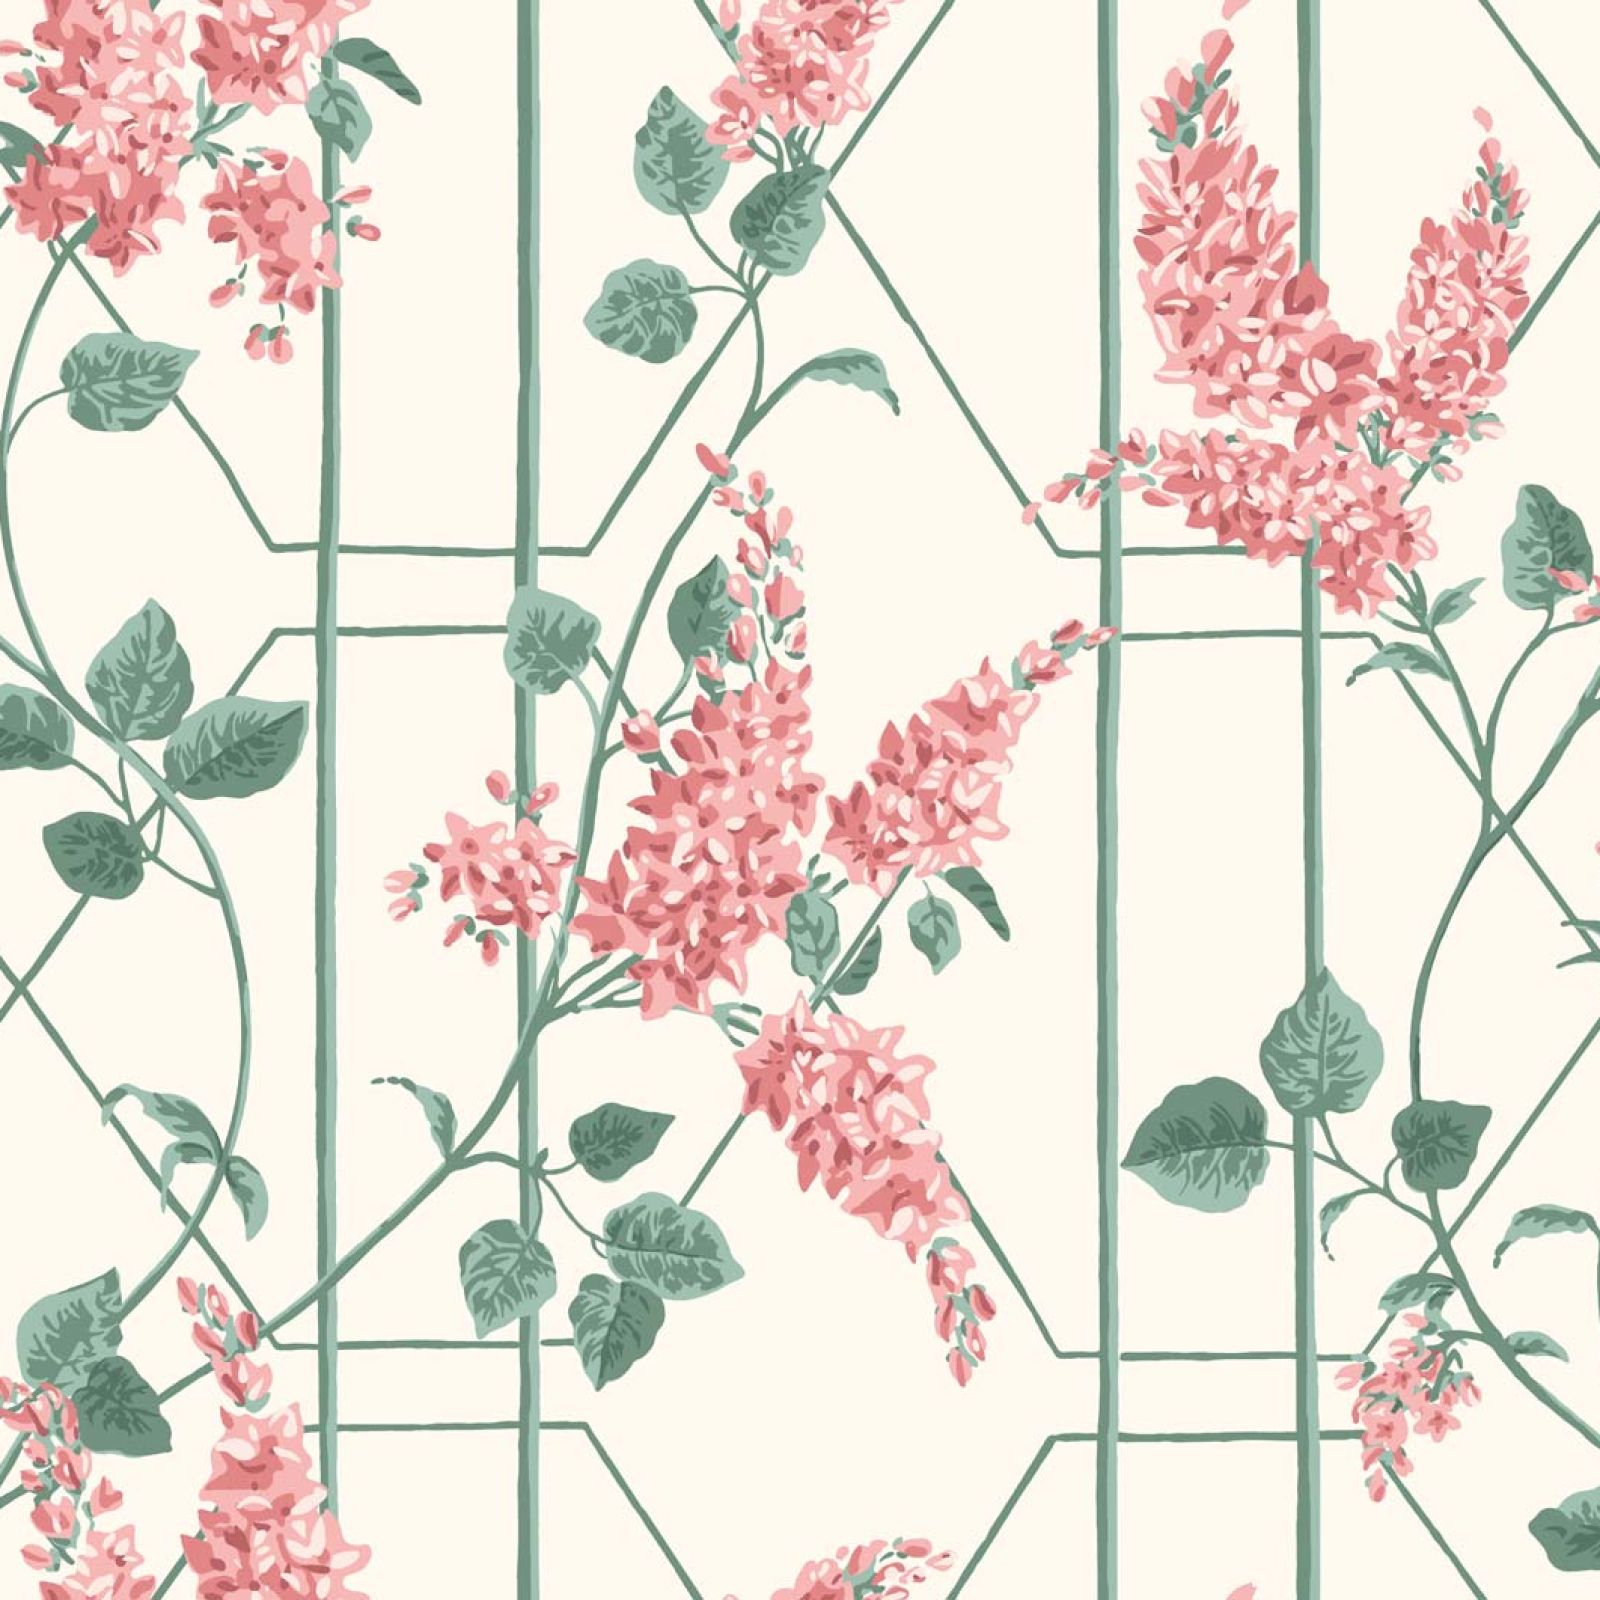 Wisteria trellis wallpaper in a choice of 5 colourways